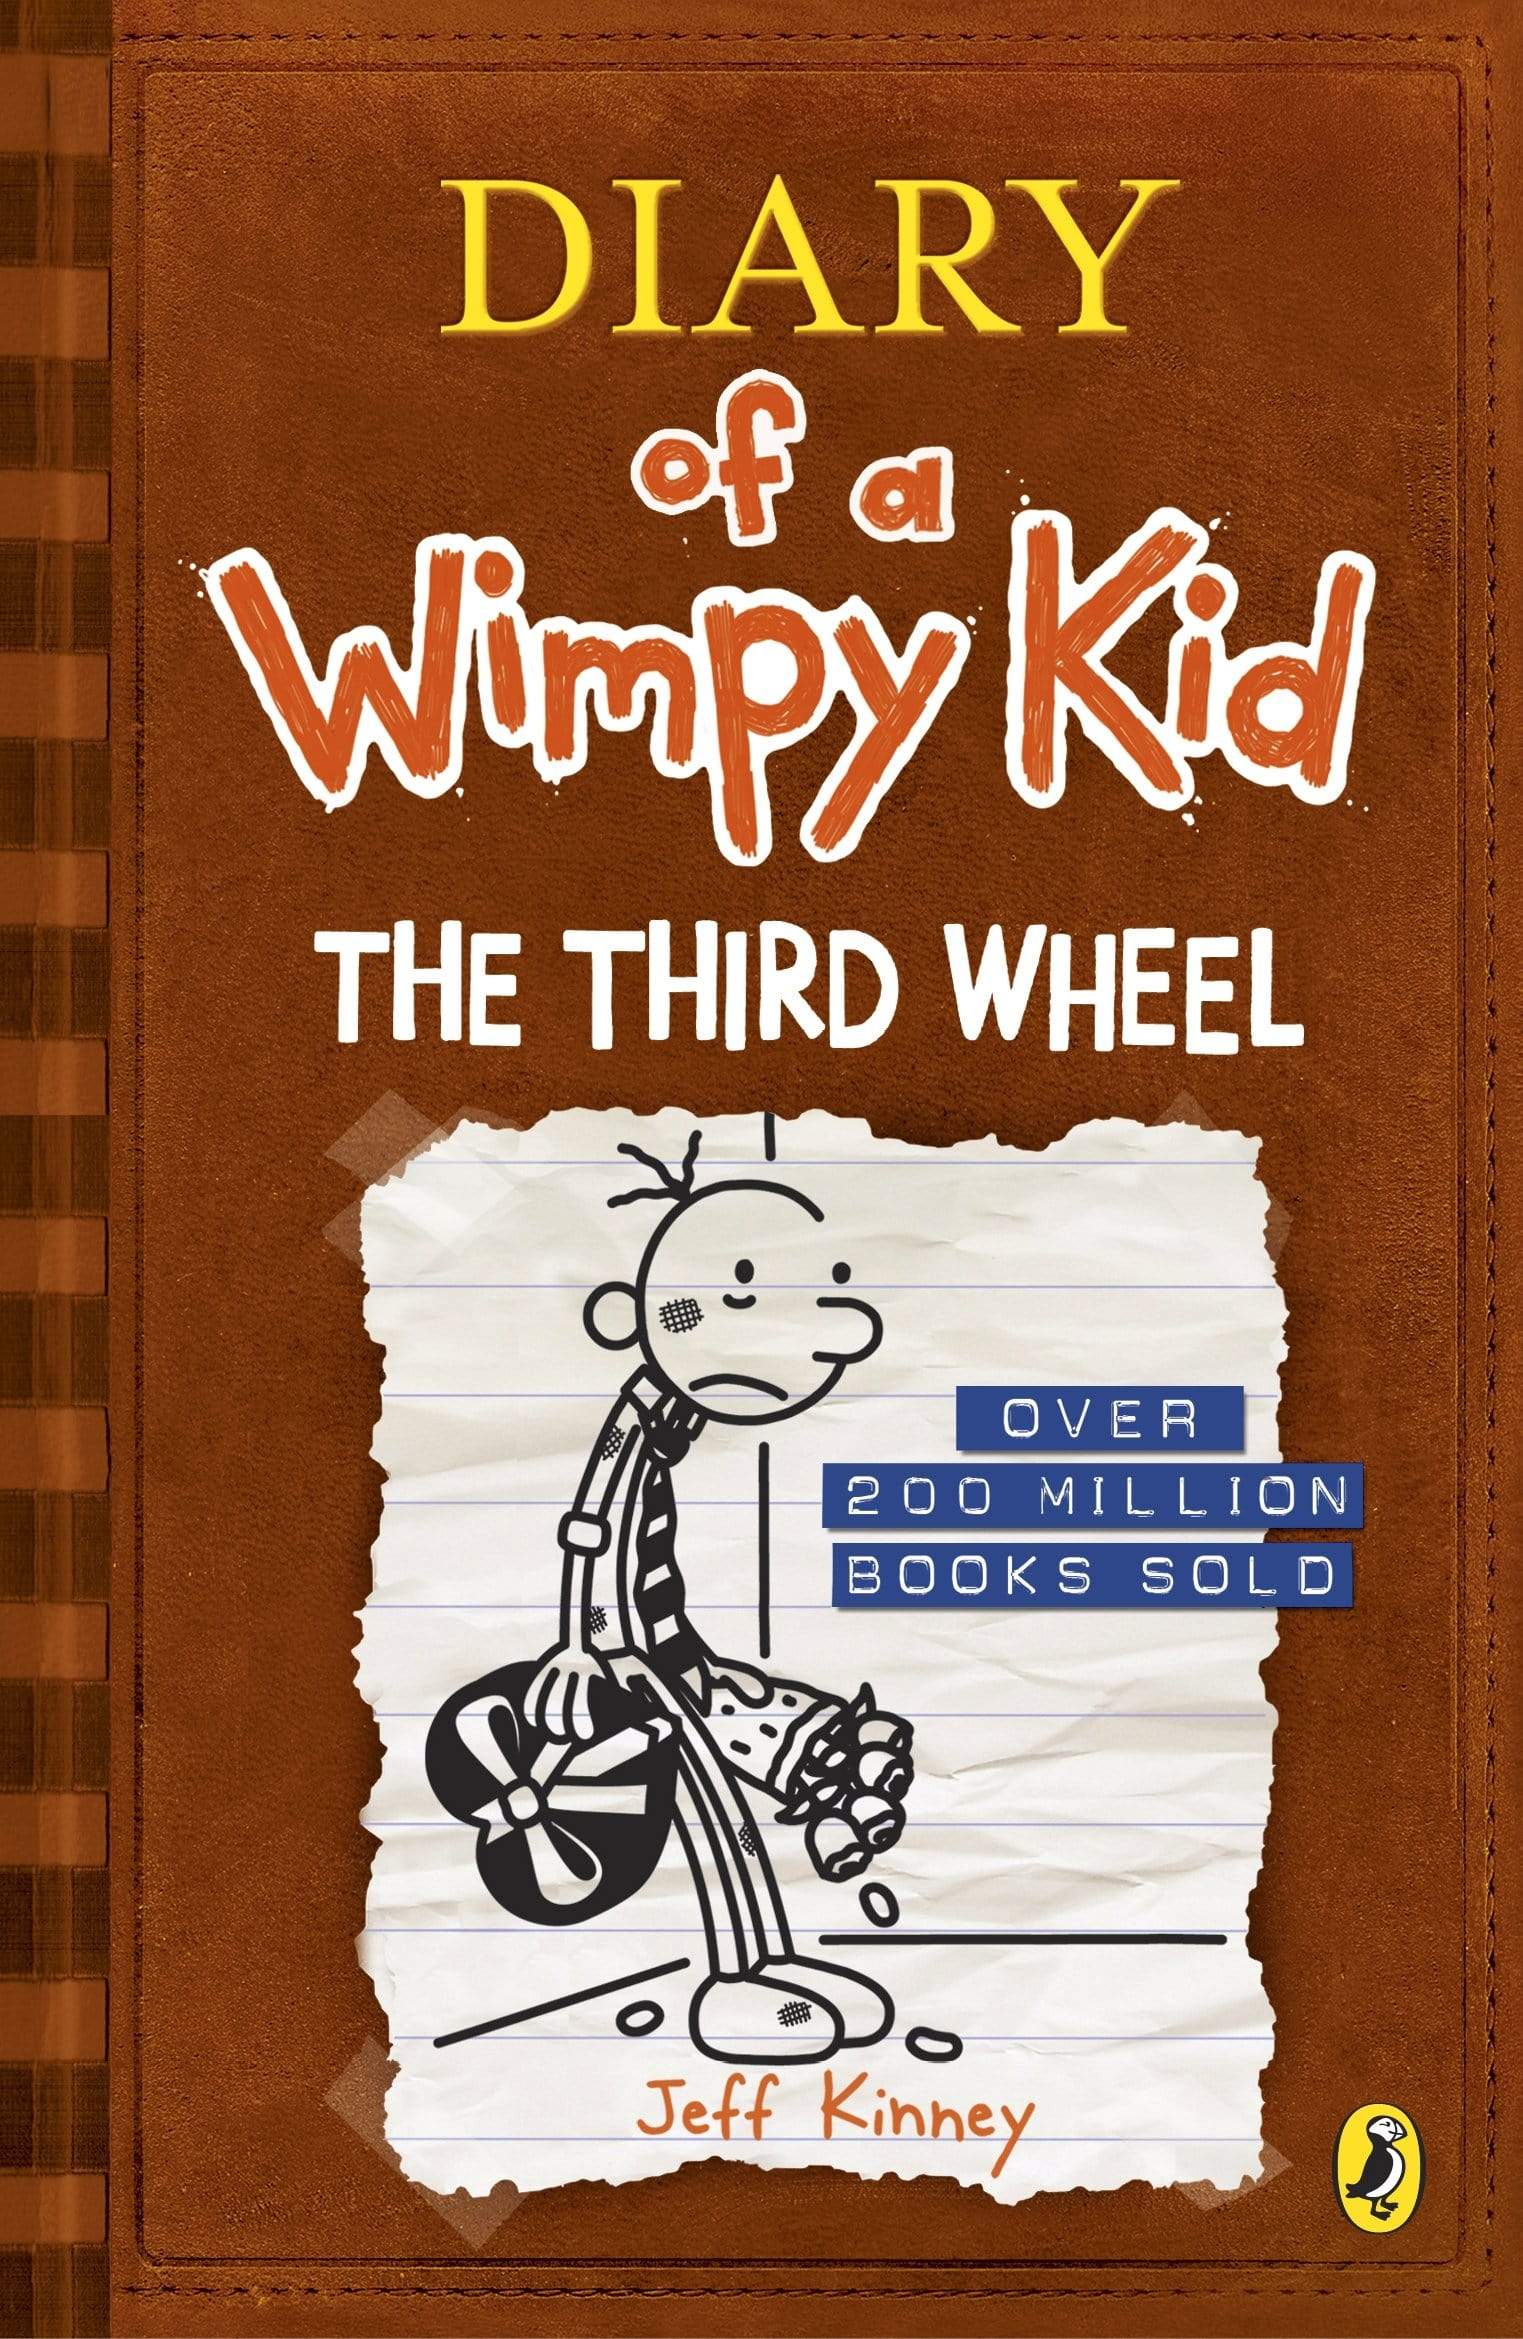 Diary of a Wimpy Kid: The Third Wheel - Jashanmal Home